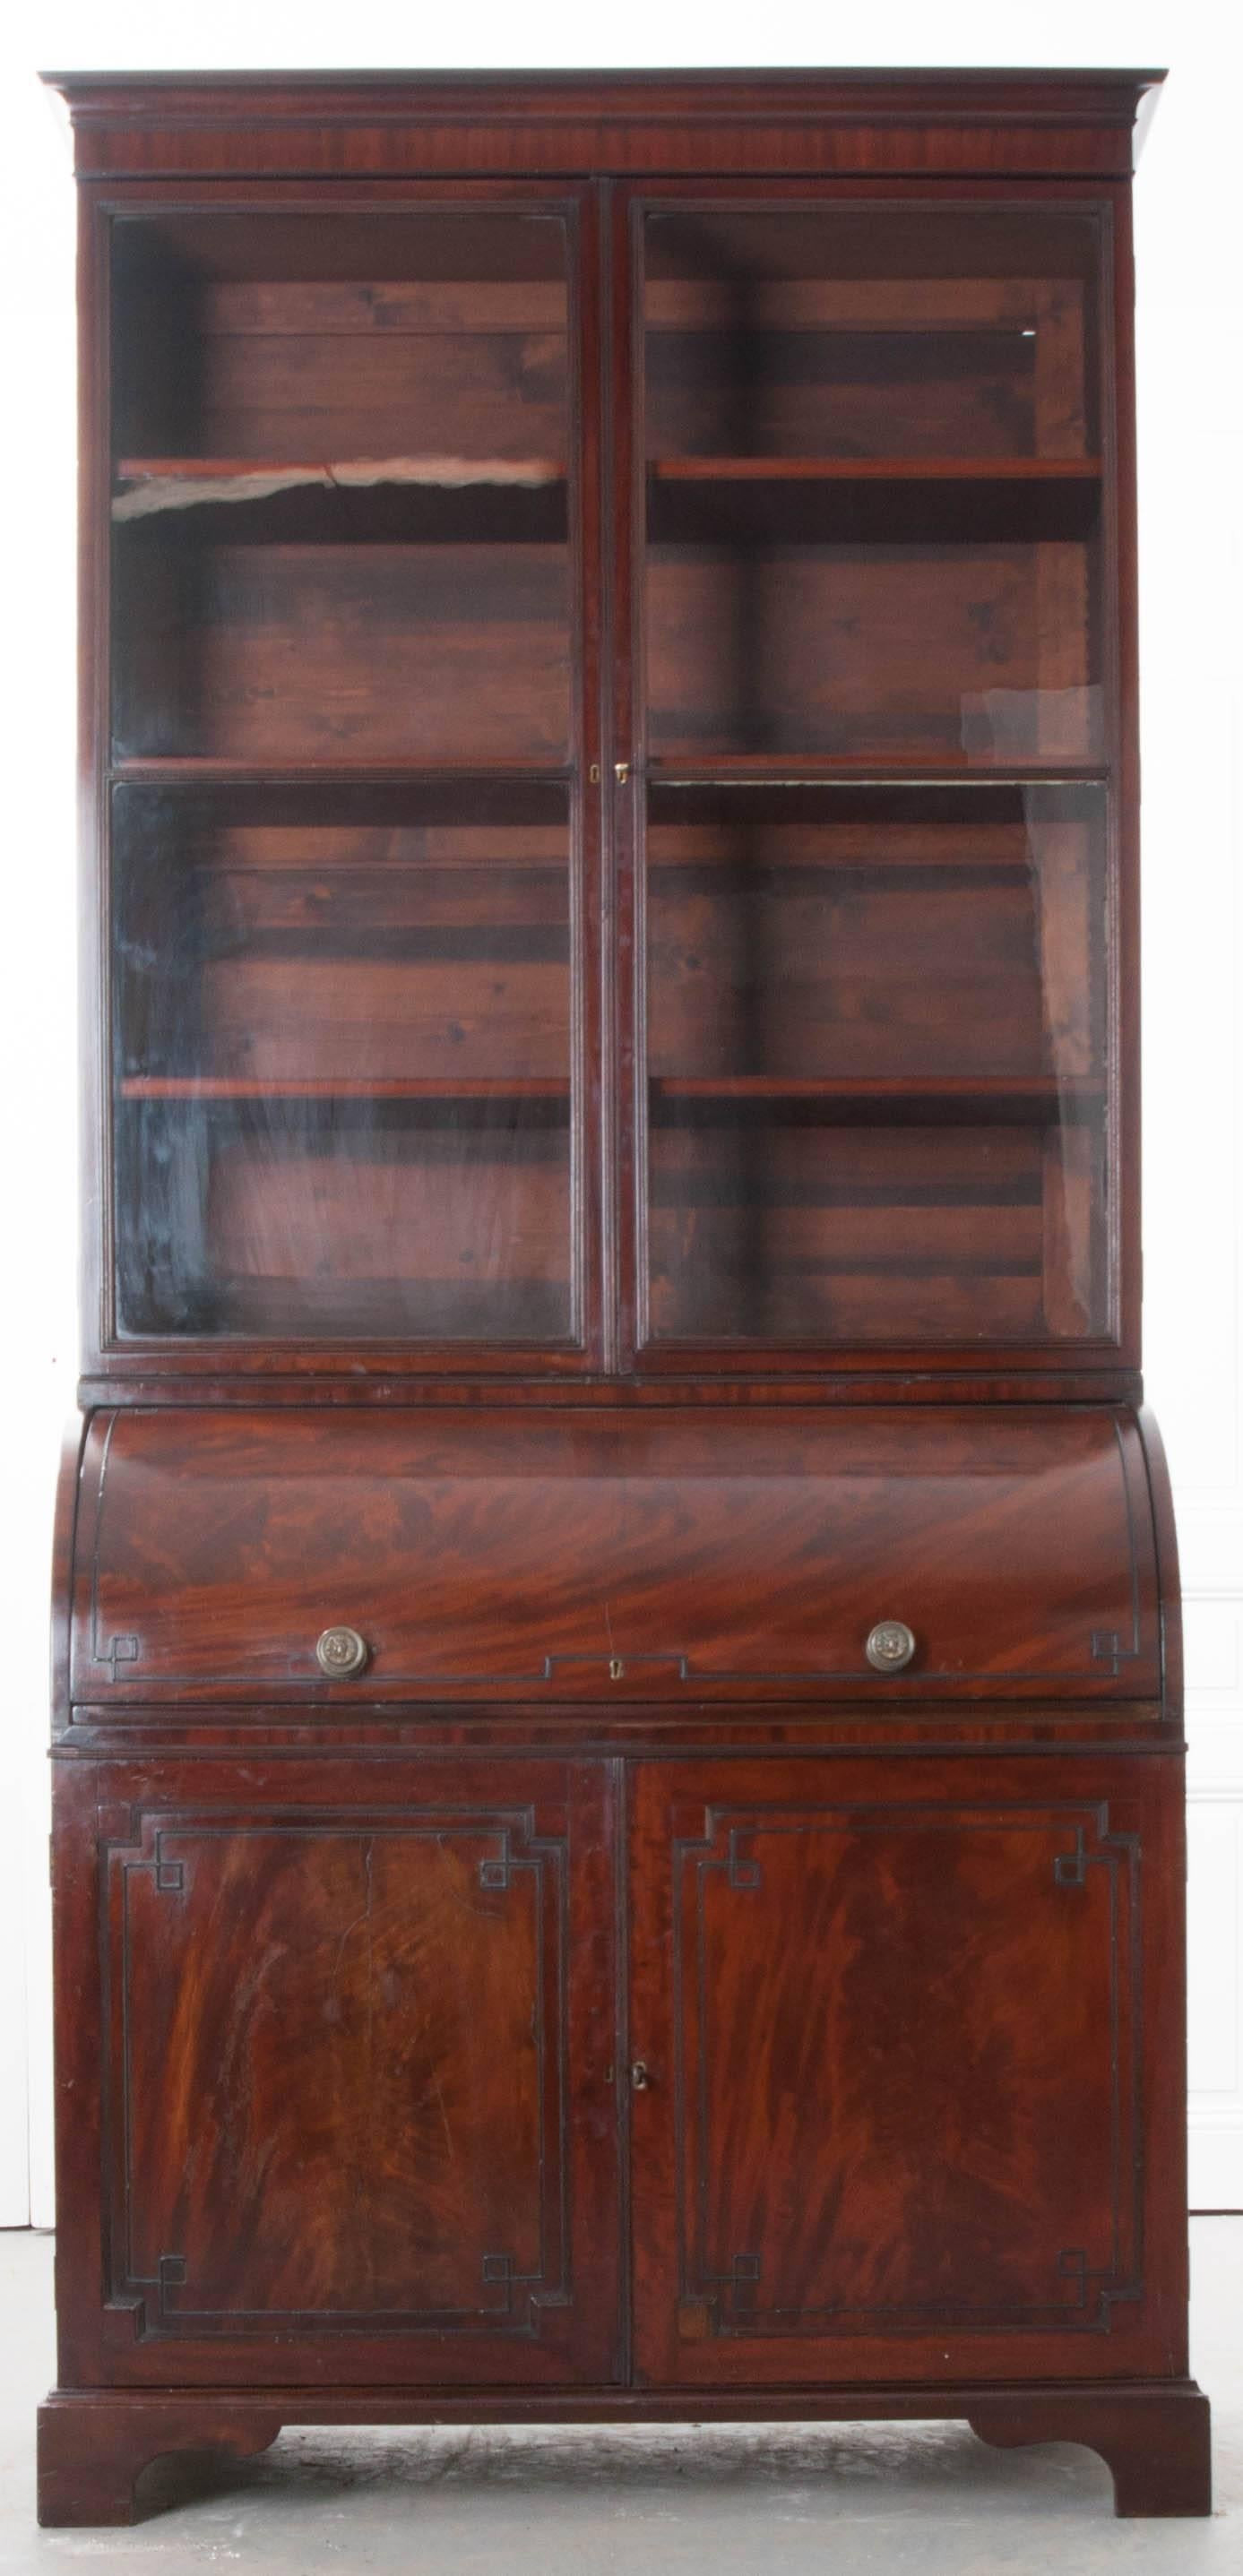 A handsome mahogany secretary with glass-front cabinet and roll top from England, circa 1830. This tall secretary has an upper body that is equipped with three finished and adjustable shelves that are visible behind two lockable doors, which retain